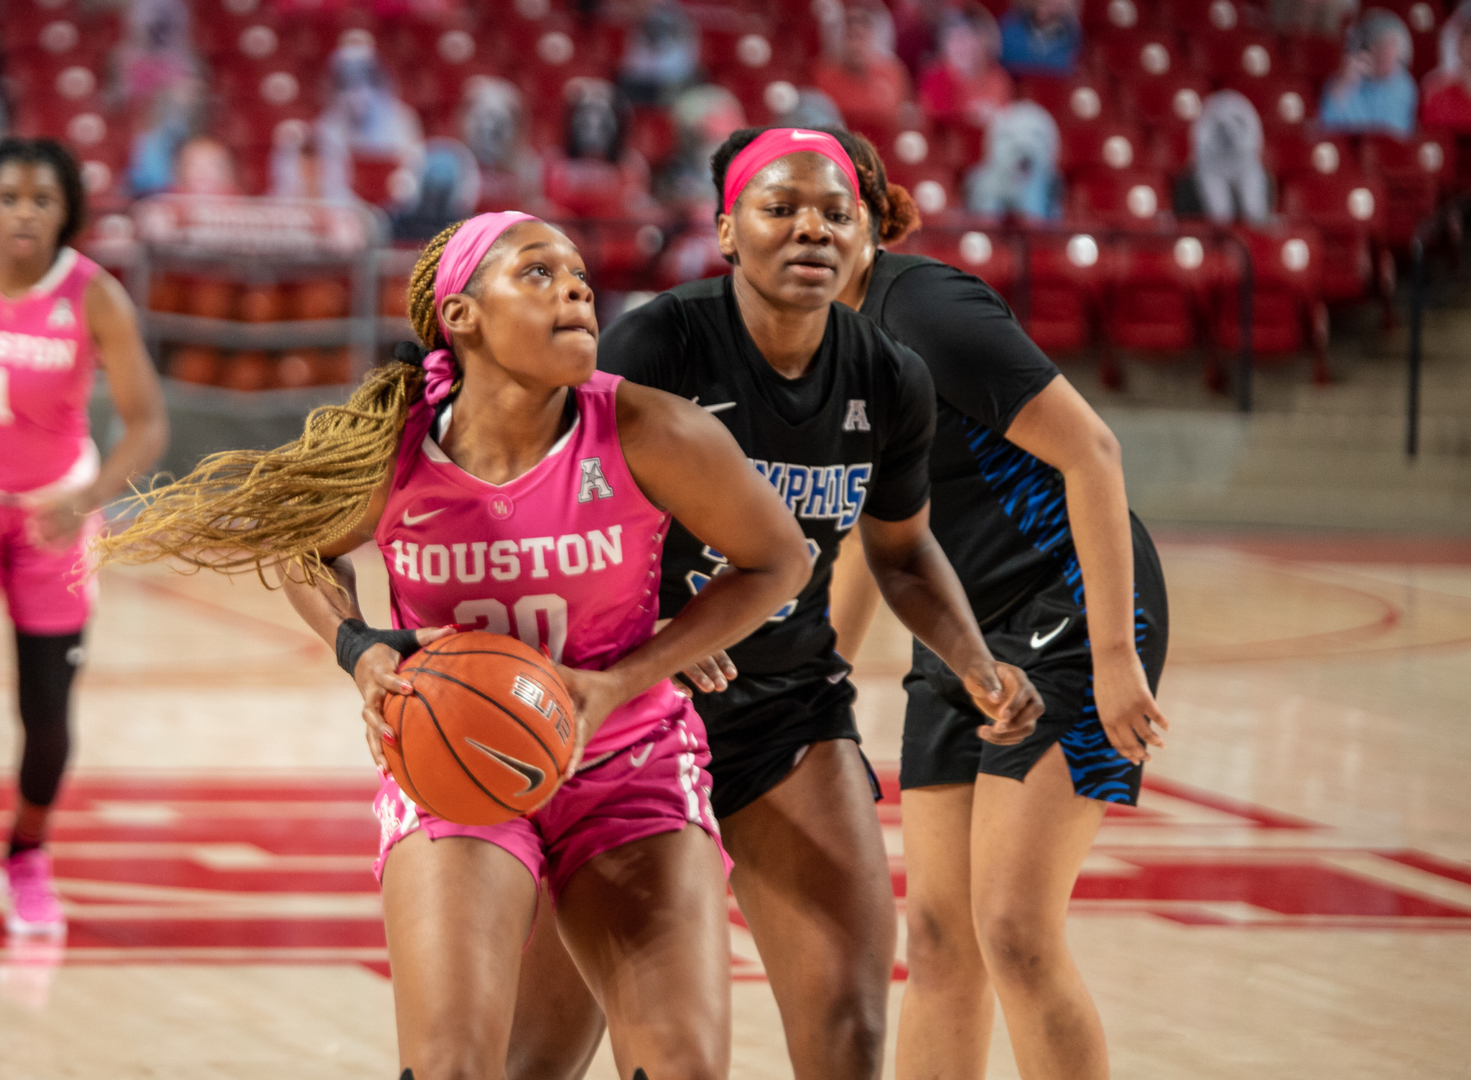 UH women’s basketball junior forward Tatyana Hill (30) drives to the basket against Memphis on Feb. 13 at the Fertitta Center. Hill led the team with 15 points and nine rebounds. | Andy Yanez/The Cougar